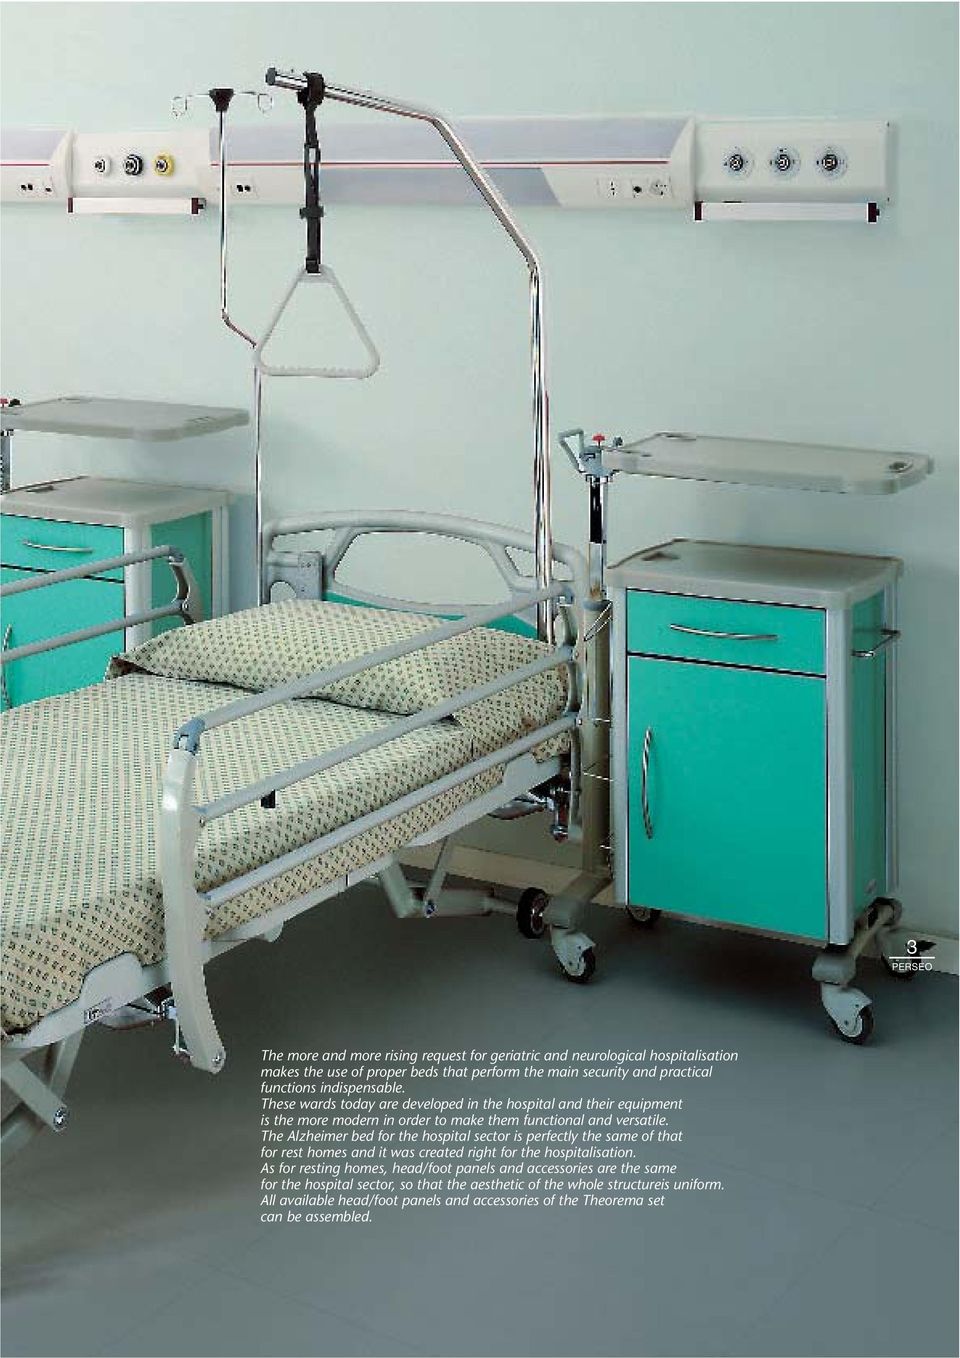 The Alzheimer bed for the hospital sector is perfectly the same of that for rest homes and it was created right for the hospitalisation.